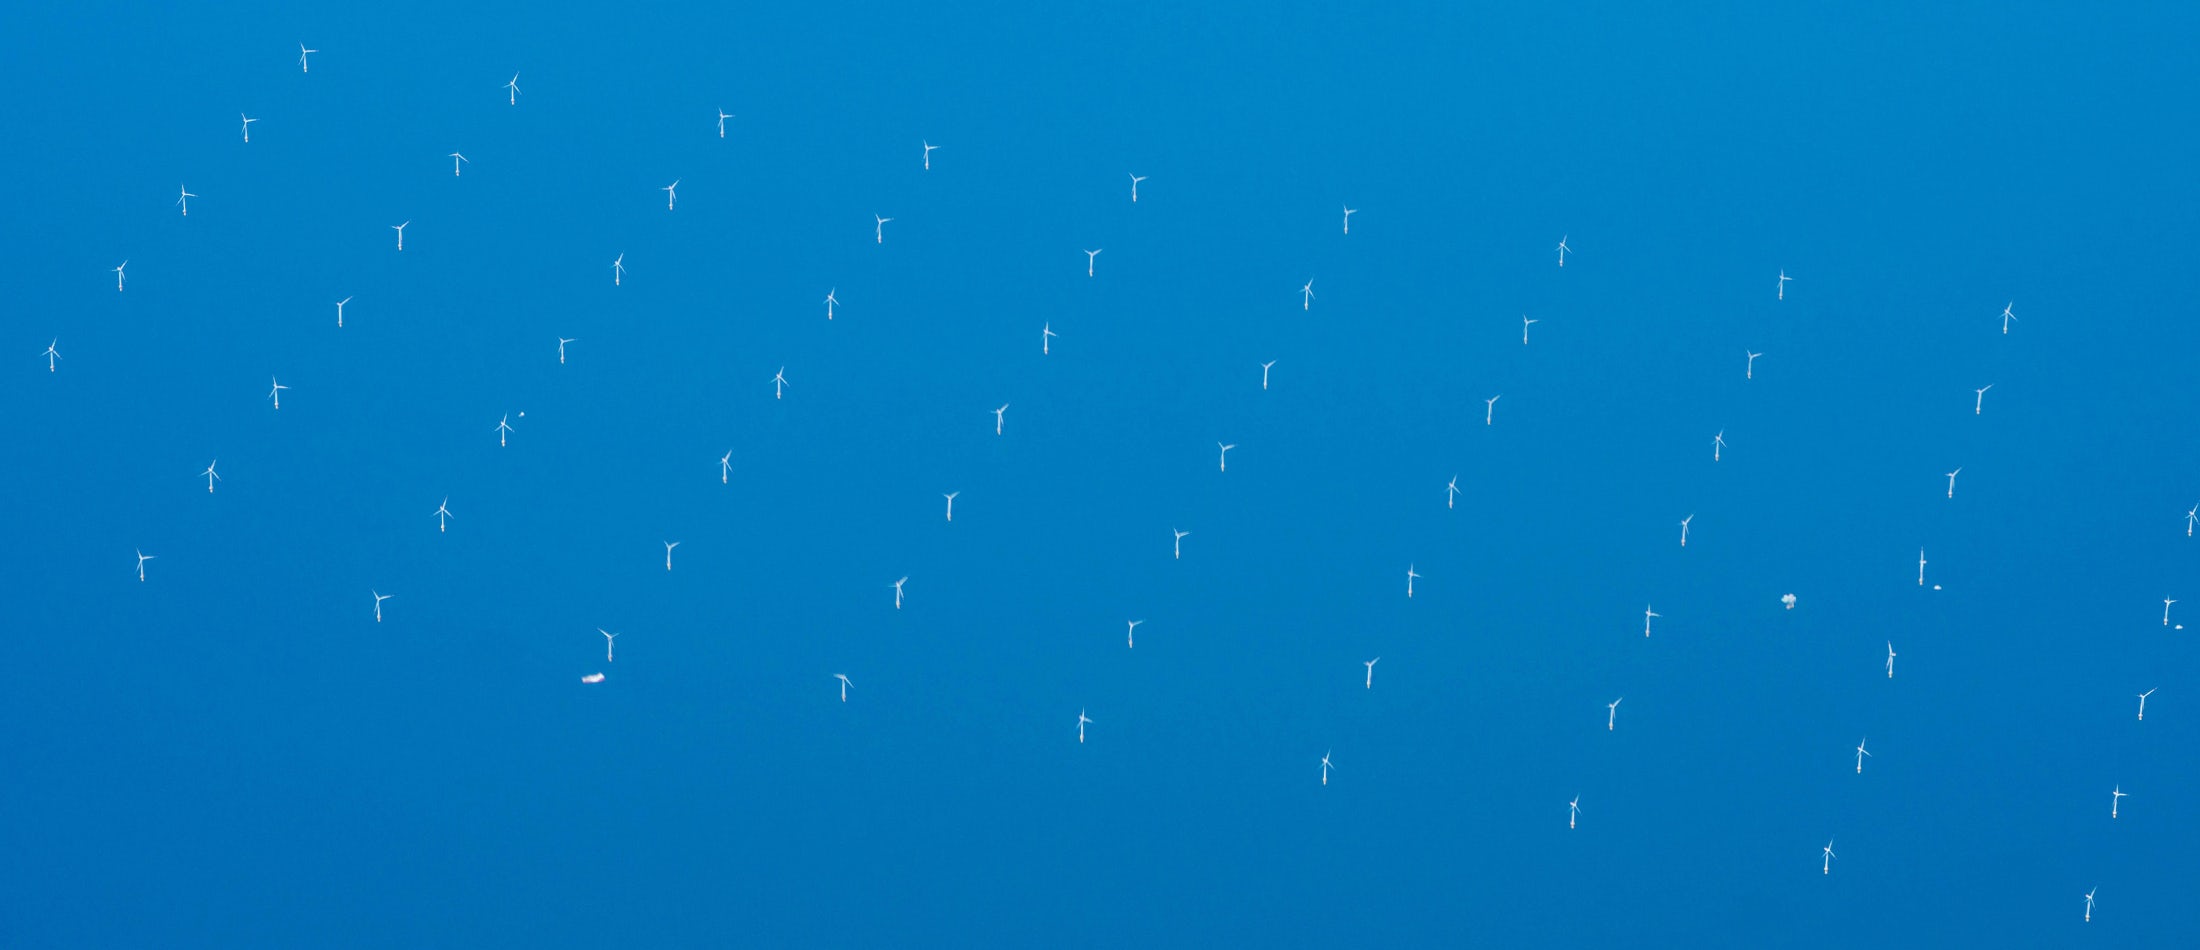 Offshore Wind Potential New Leasing